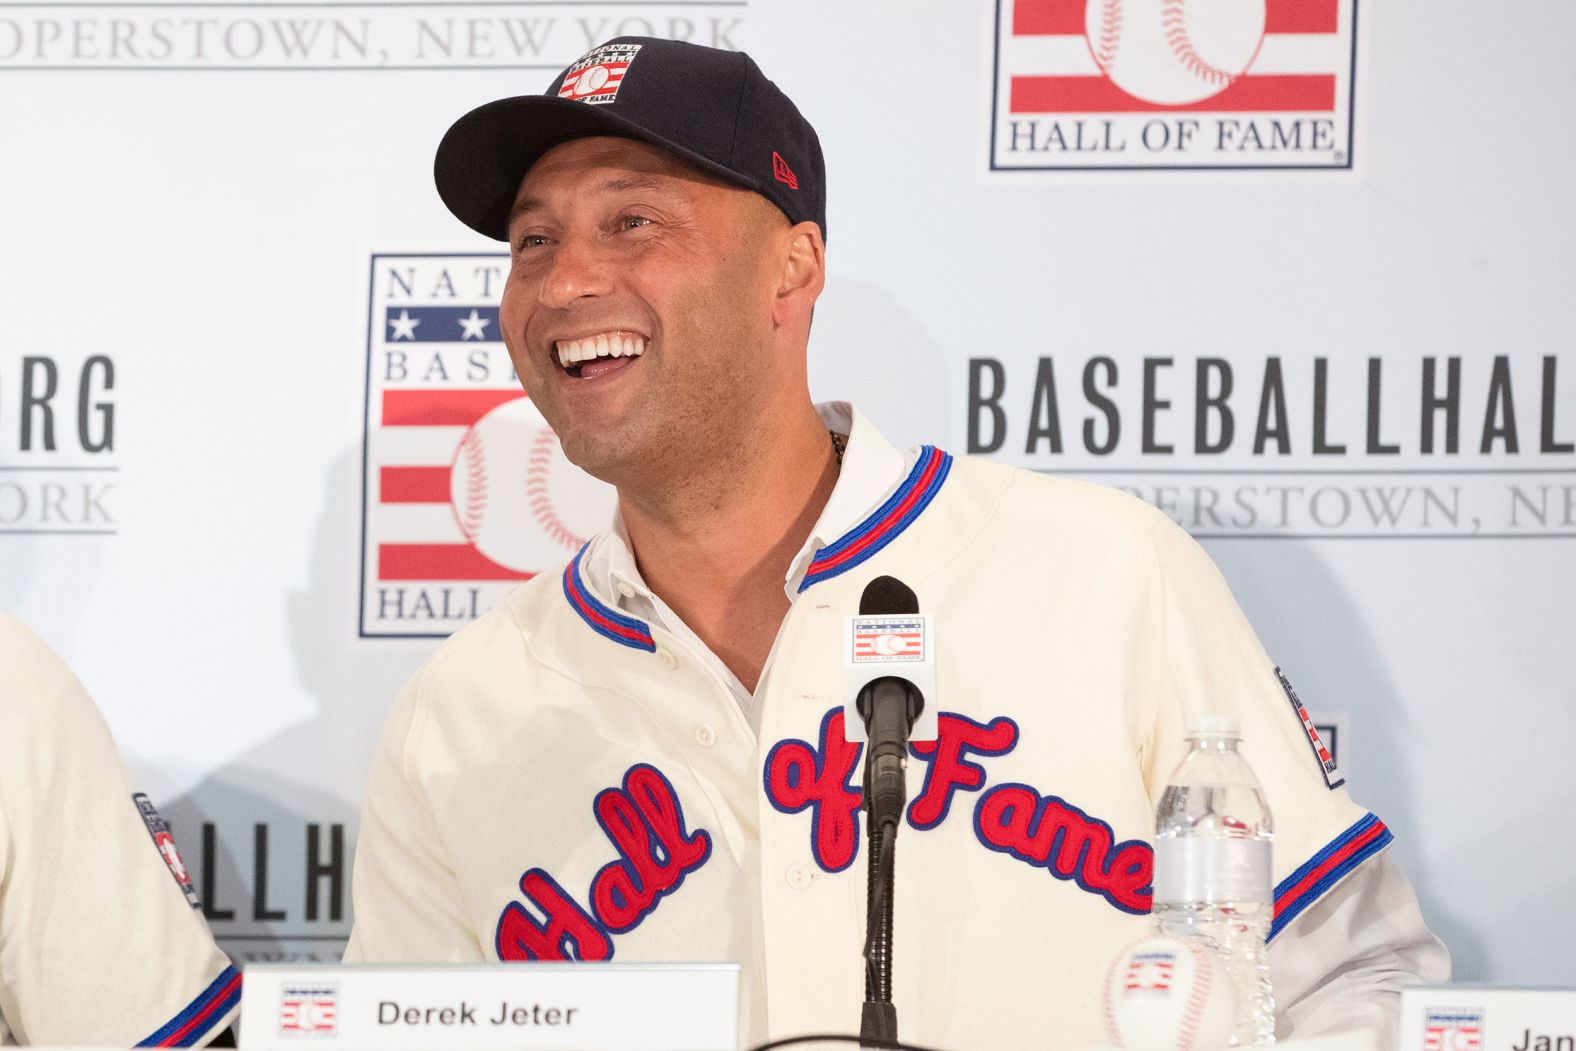 Jeter speaks to the media after it was announced that <a href="index.php?page=&url=https%3A%2F%2Fwww.cnn.com%2F2020%2F01%2F21%2Fus%2Fbaseball-hall-of-fame-elections-derek-jeter-larry-walker%2Findex.html" target="_blank">he had been elected to the Baseball Hall of Fame</a> in 2020. He was one vote away from being the second player ever to be unanimously elected.